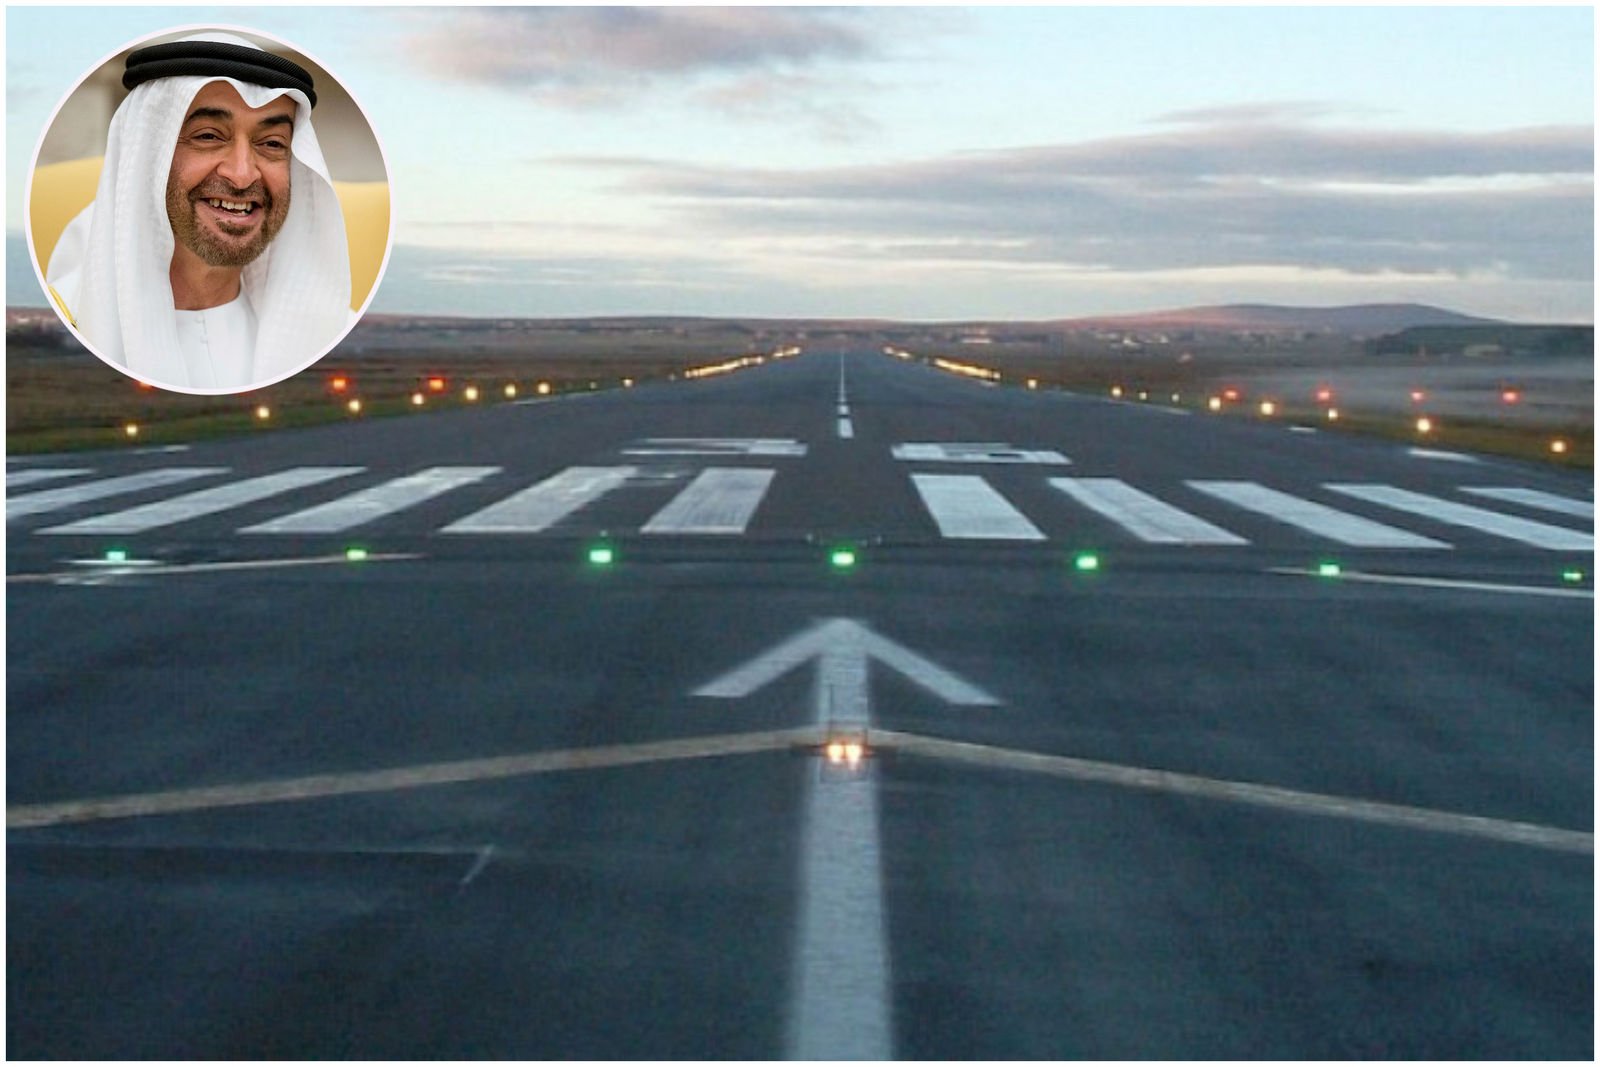 On his recent family holiday to South Africa the ruler of Abu Dhabi actually built a massive runway for himself so his entourage could land their cargo planes – Along with cars he even flew down gym equipment and furniture